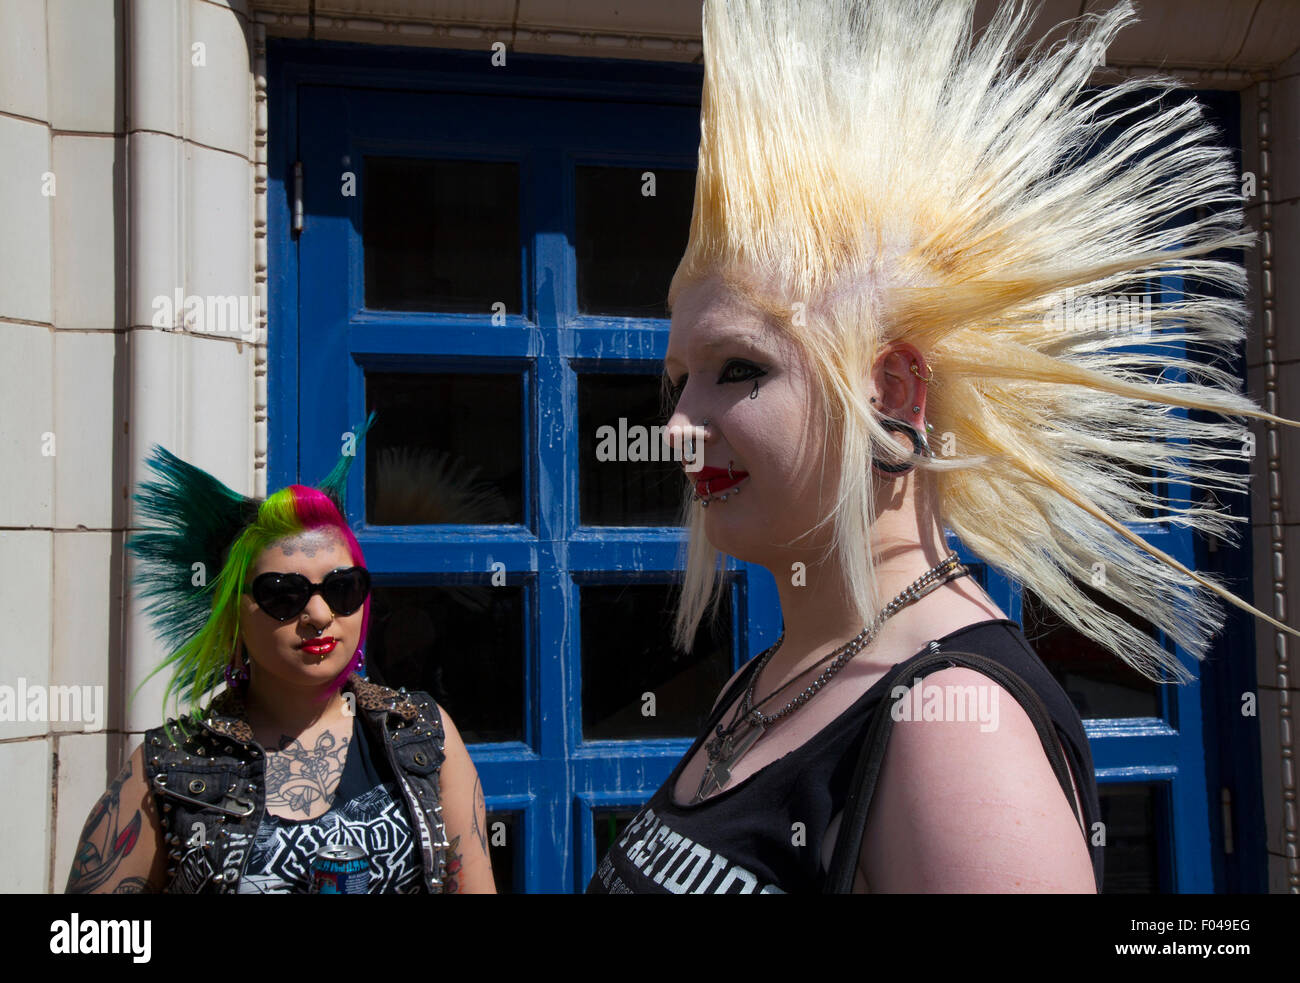 Punks with mohican dyed liberty mohican hairstyle at Blackpool, Lancashire, UK. 7th Aug, 2015. Punk Rebellion couple ,festival at The Winter Gardens. A clash cultures at the famous seaside town of Blackpool as punks, with liberty spiked hairstyles & studs, studded,  nose ring, fashionable, female, hair, skin. Women attending the annual Rebellion festival at the Winter Gardens come shoulder to shoulder with traditional holidaymakers.  Credit: MediaWorldImages/Alamy Live News Stock Photo